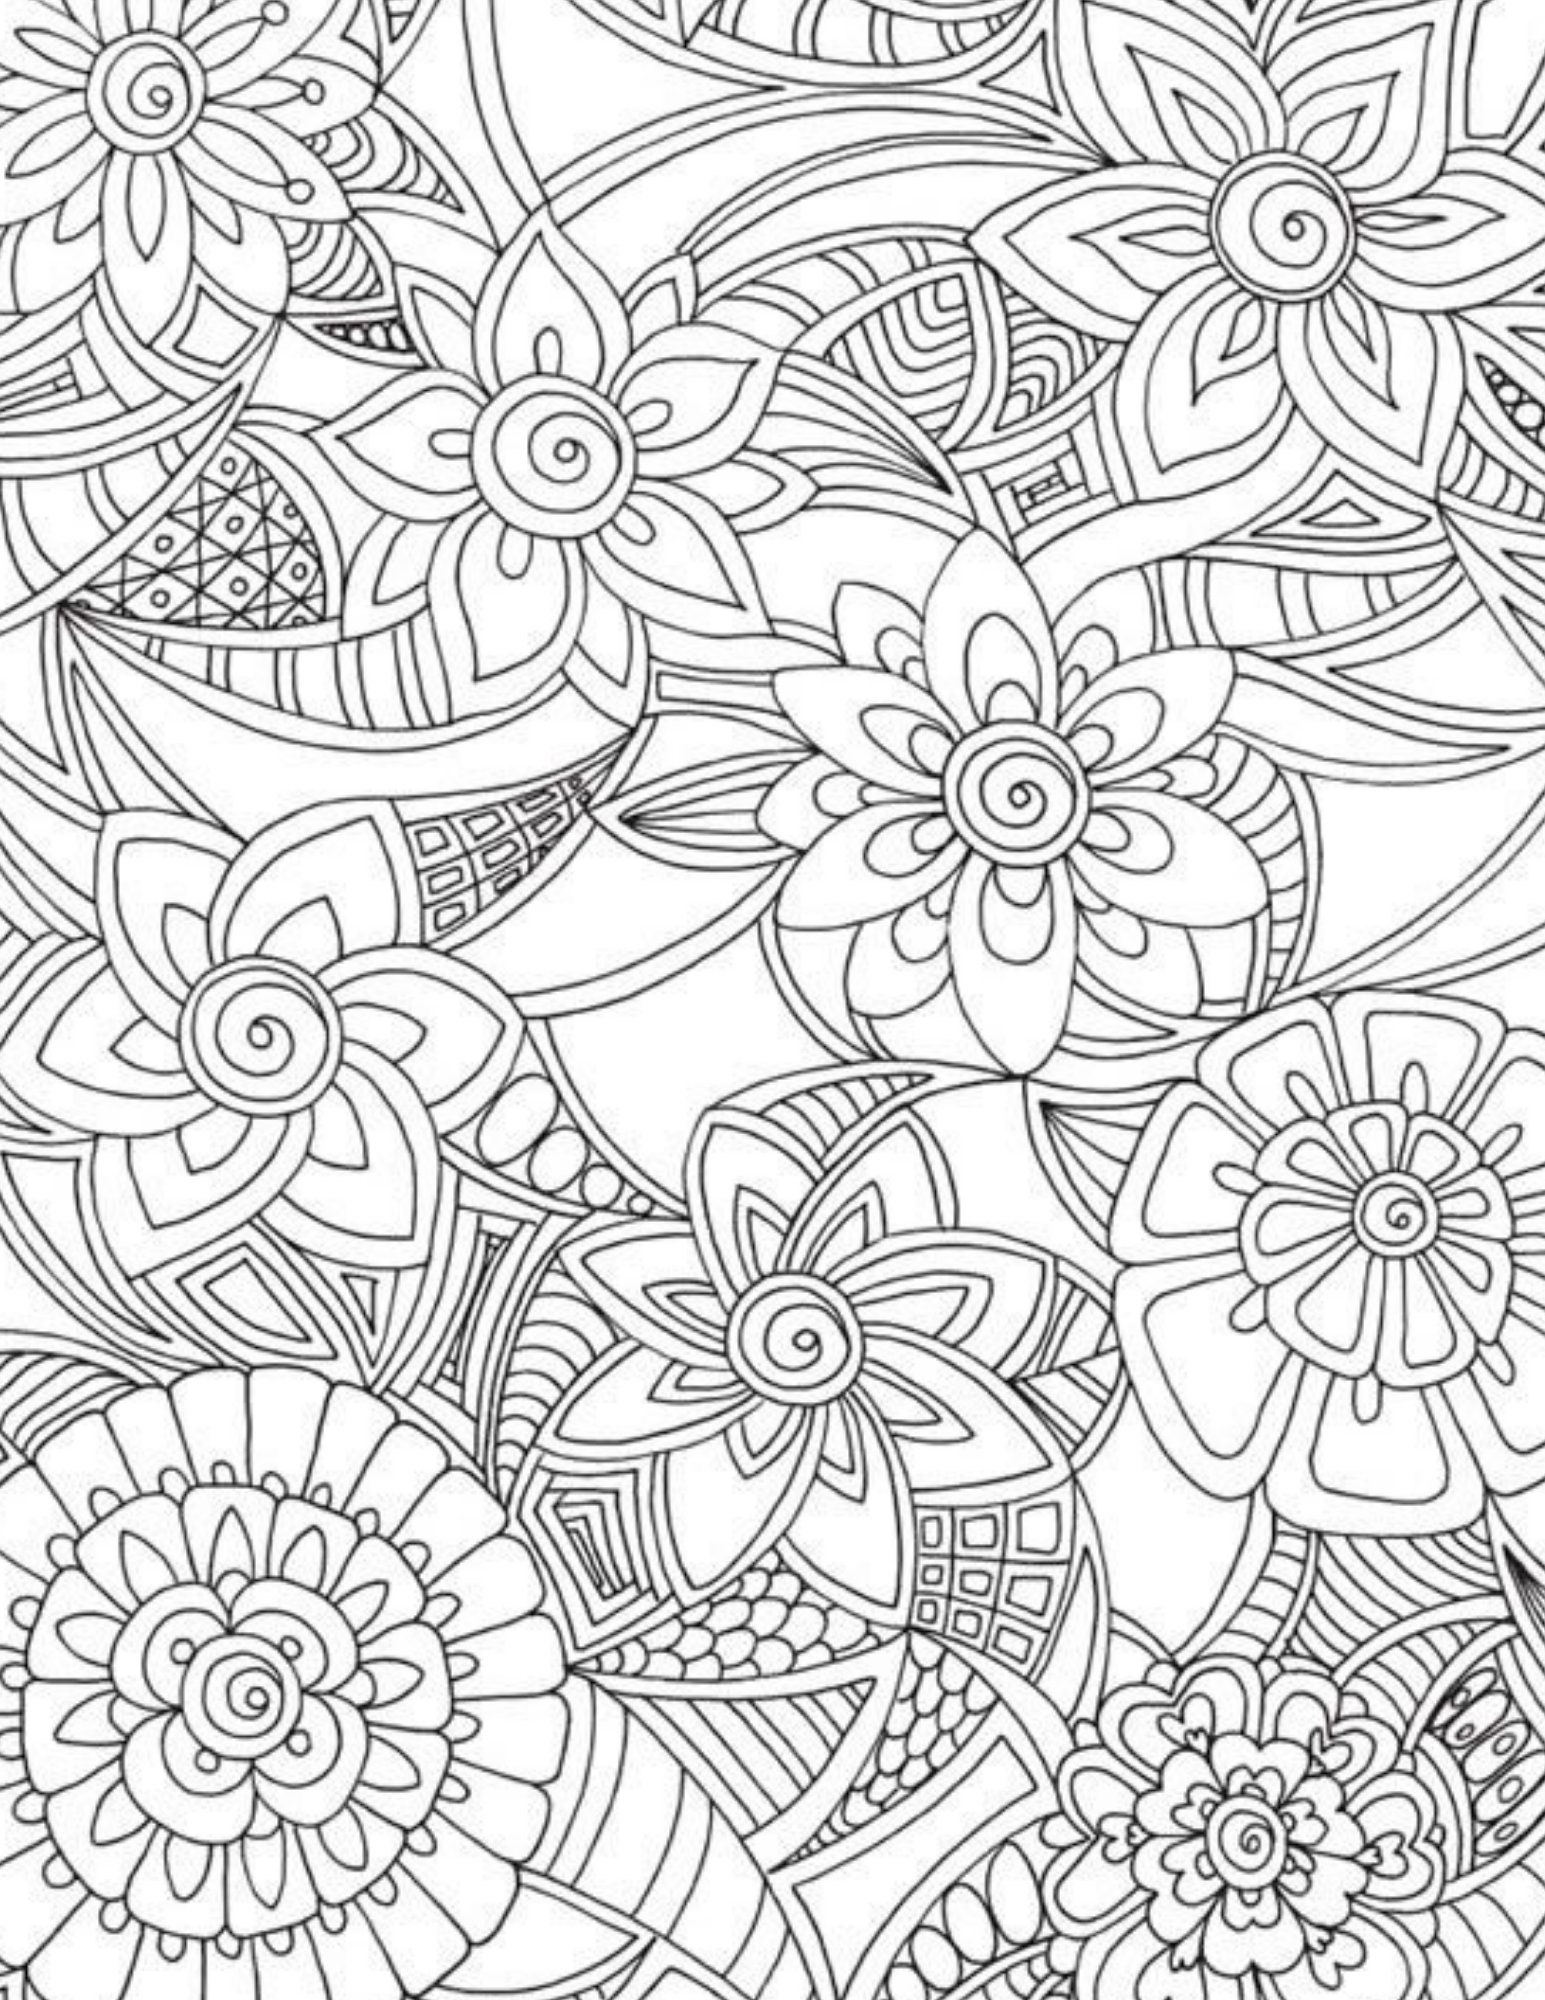 Stress Relief Coloring Book: Colouring Krewella (Paperback)